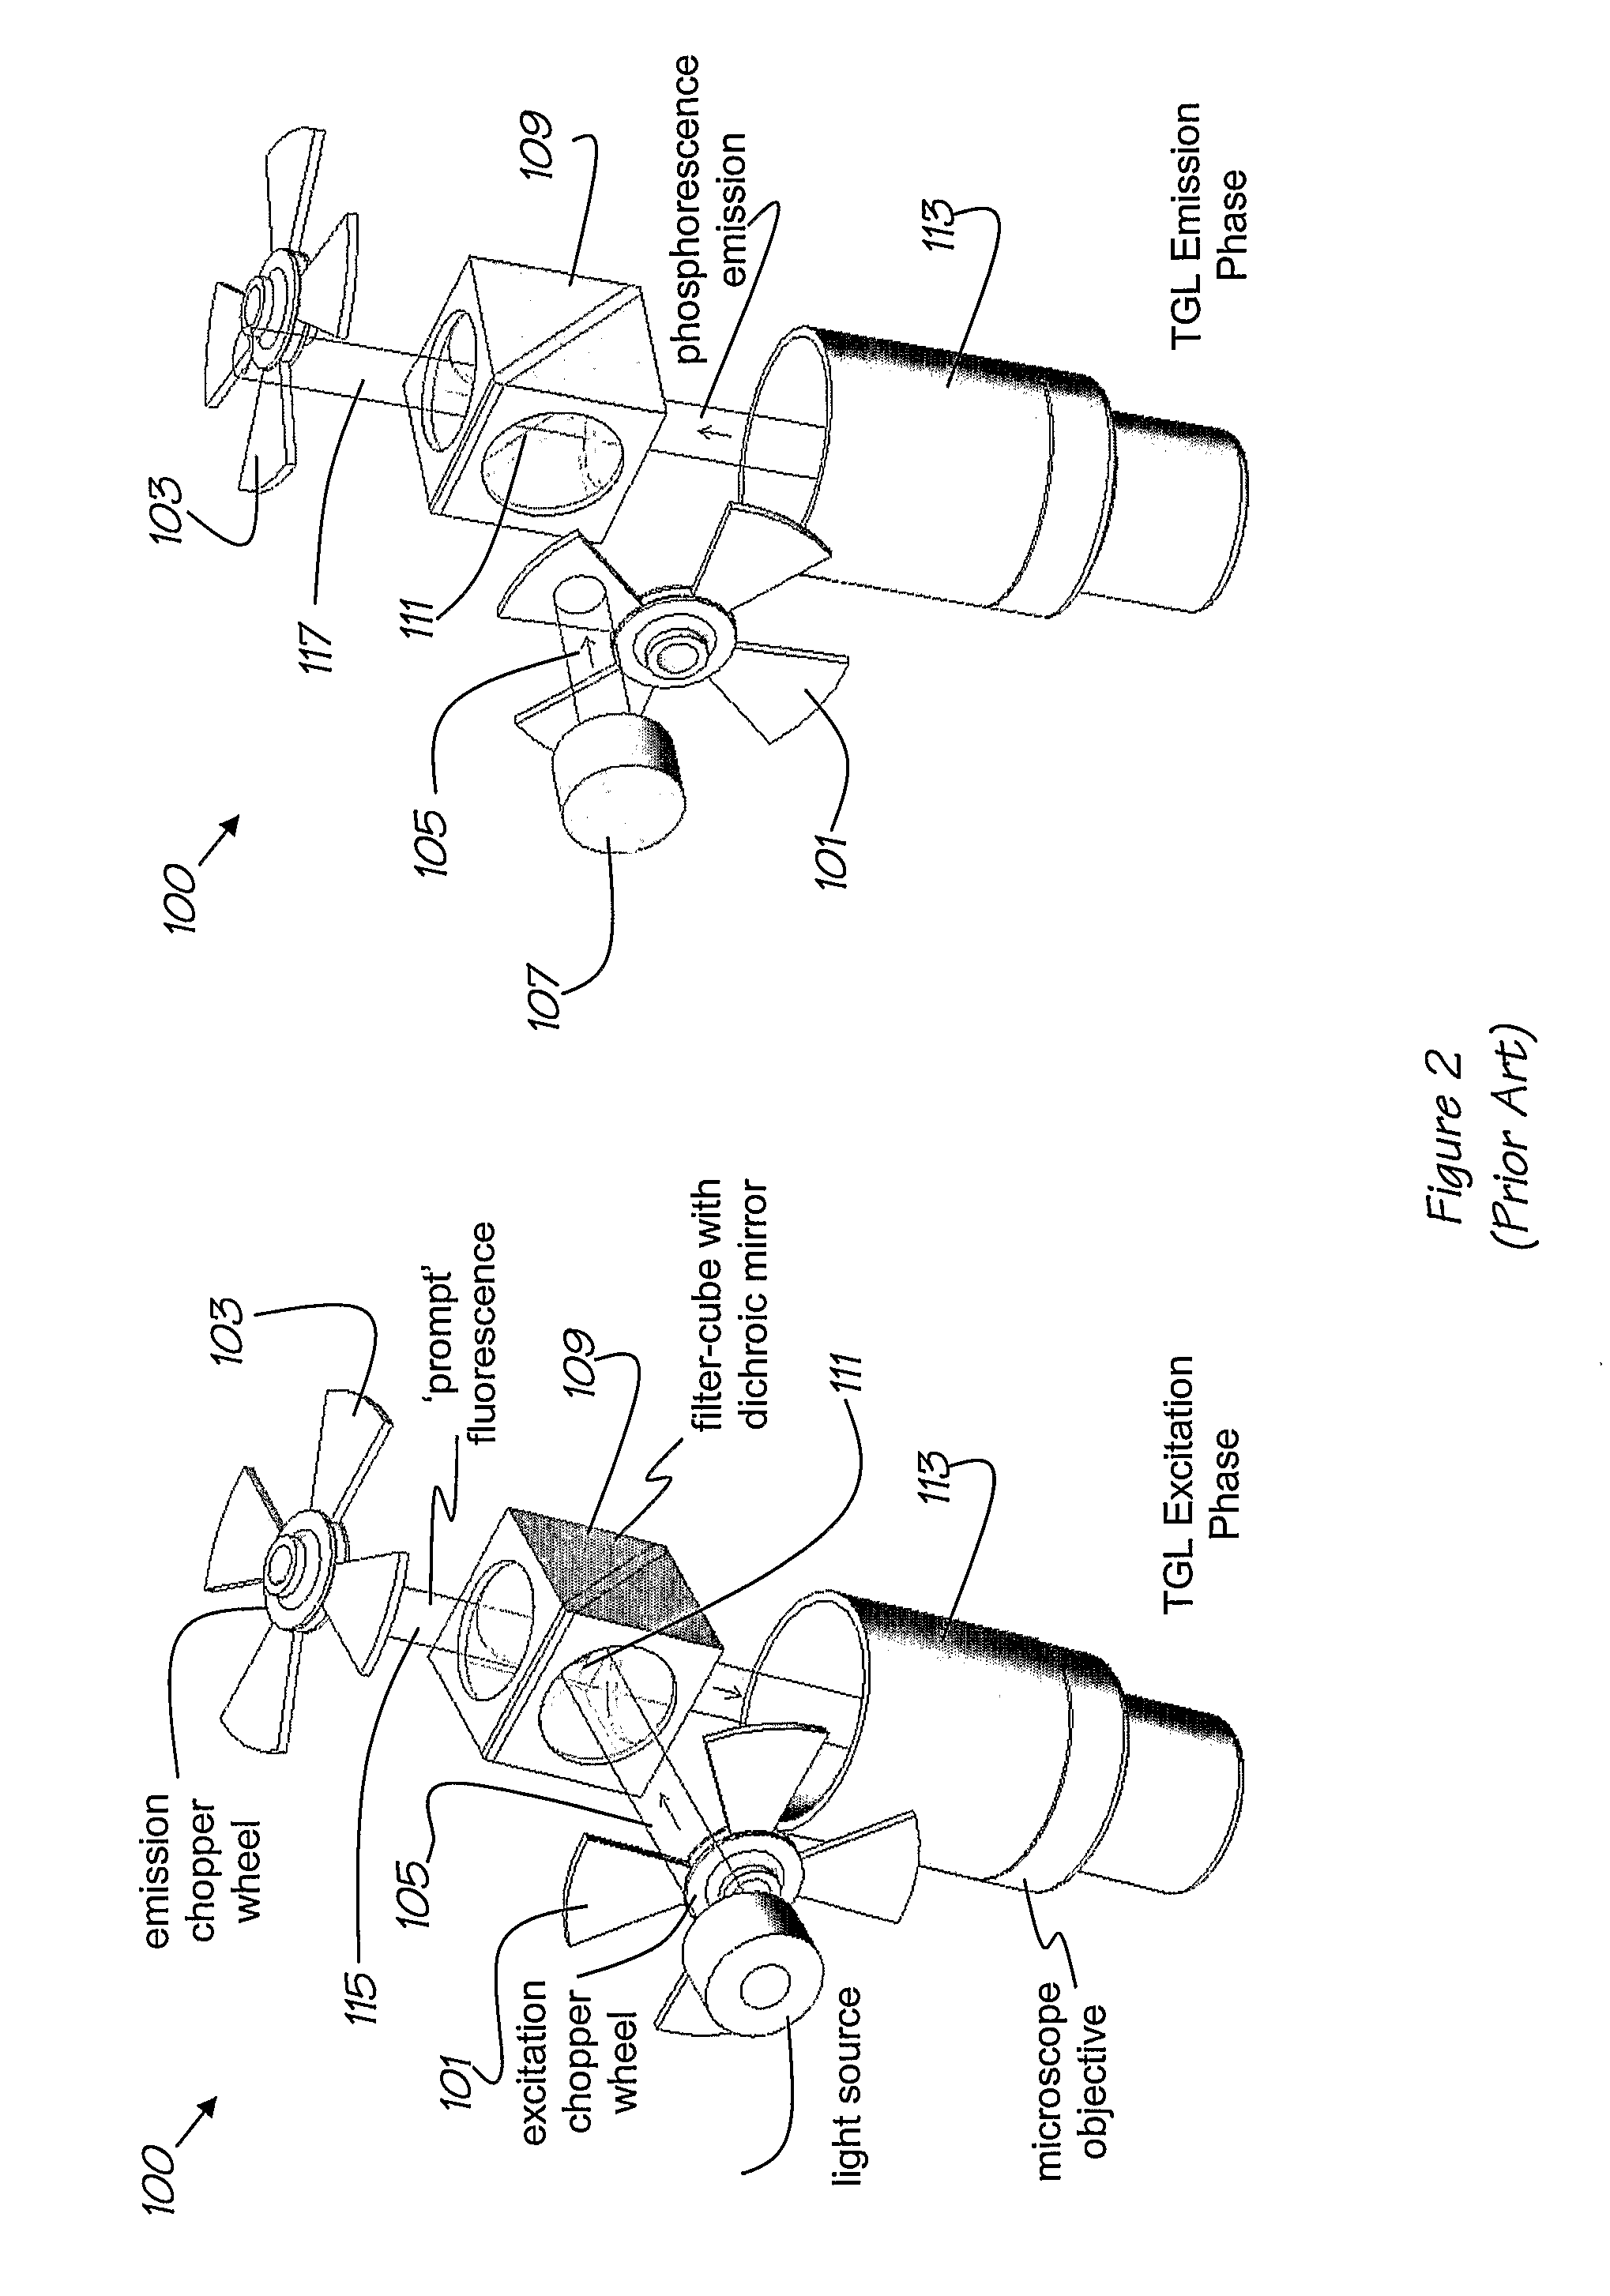 Auto-synchronous fluorescence detection method and apparatus